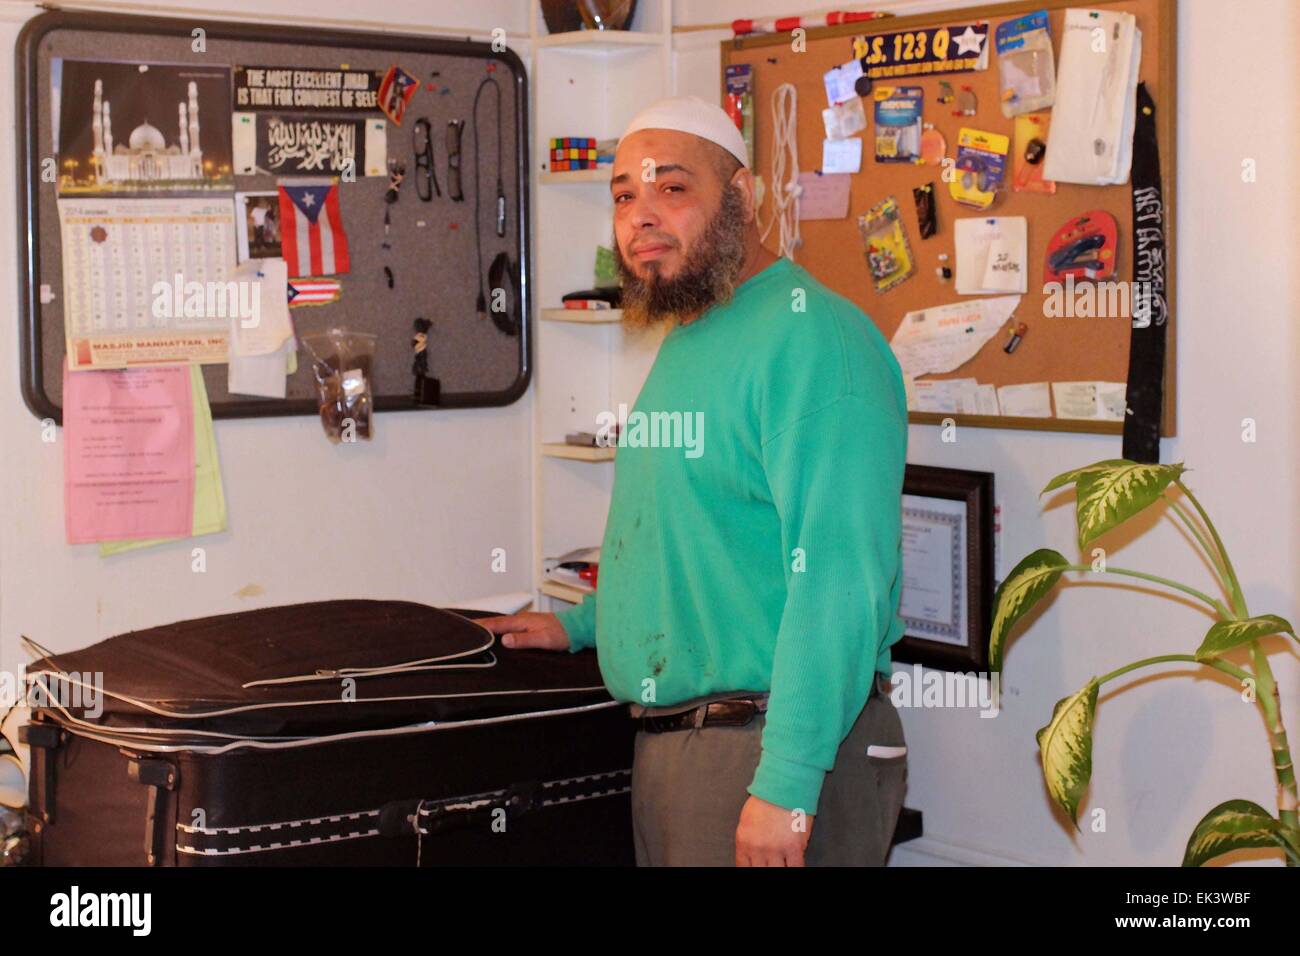 New York, New York, USA. 4th Apr, 2015. At home with Abu Bakr, husband of terror suspect Noelle Valentzas, Inwood St. Queens, Exclusive photos by John M. Mantel © John Marshall Mantel/ZUMA Wire/Alamy Live News Stock Photo